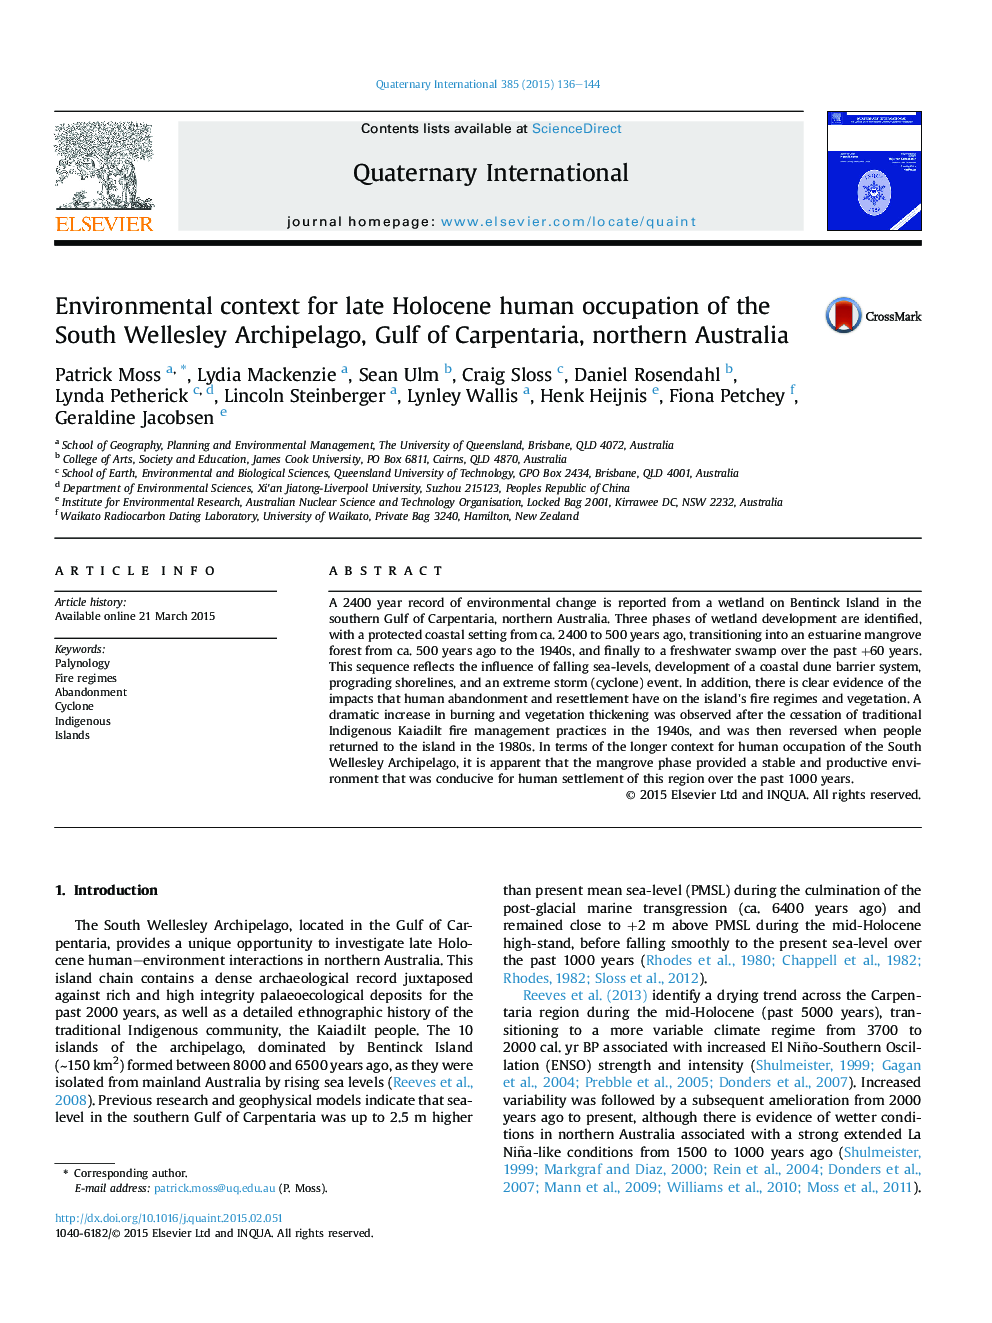 Environmental context for late Holocene human occupation of the South Wellesley Archipelago, Gulf of Carpentaria, northern Australia